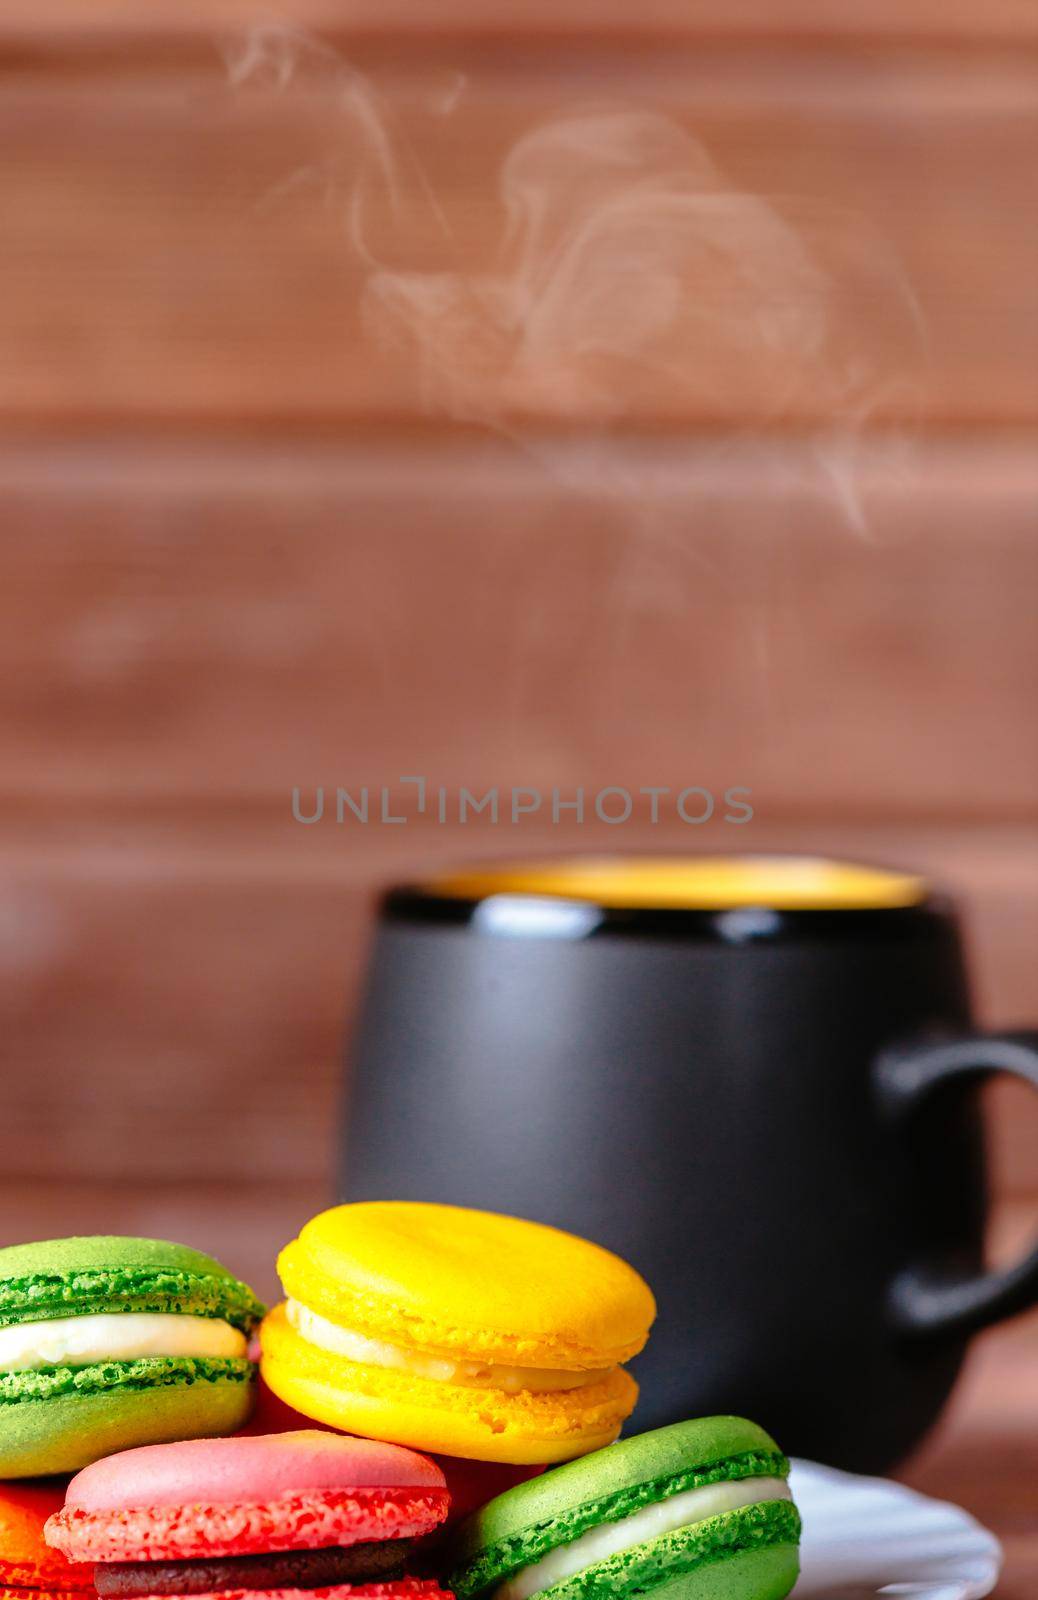 Colorful macarons cookies and cup of hot drink on a wooden background.